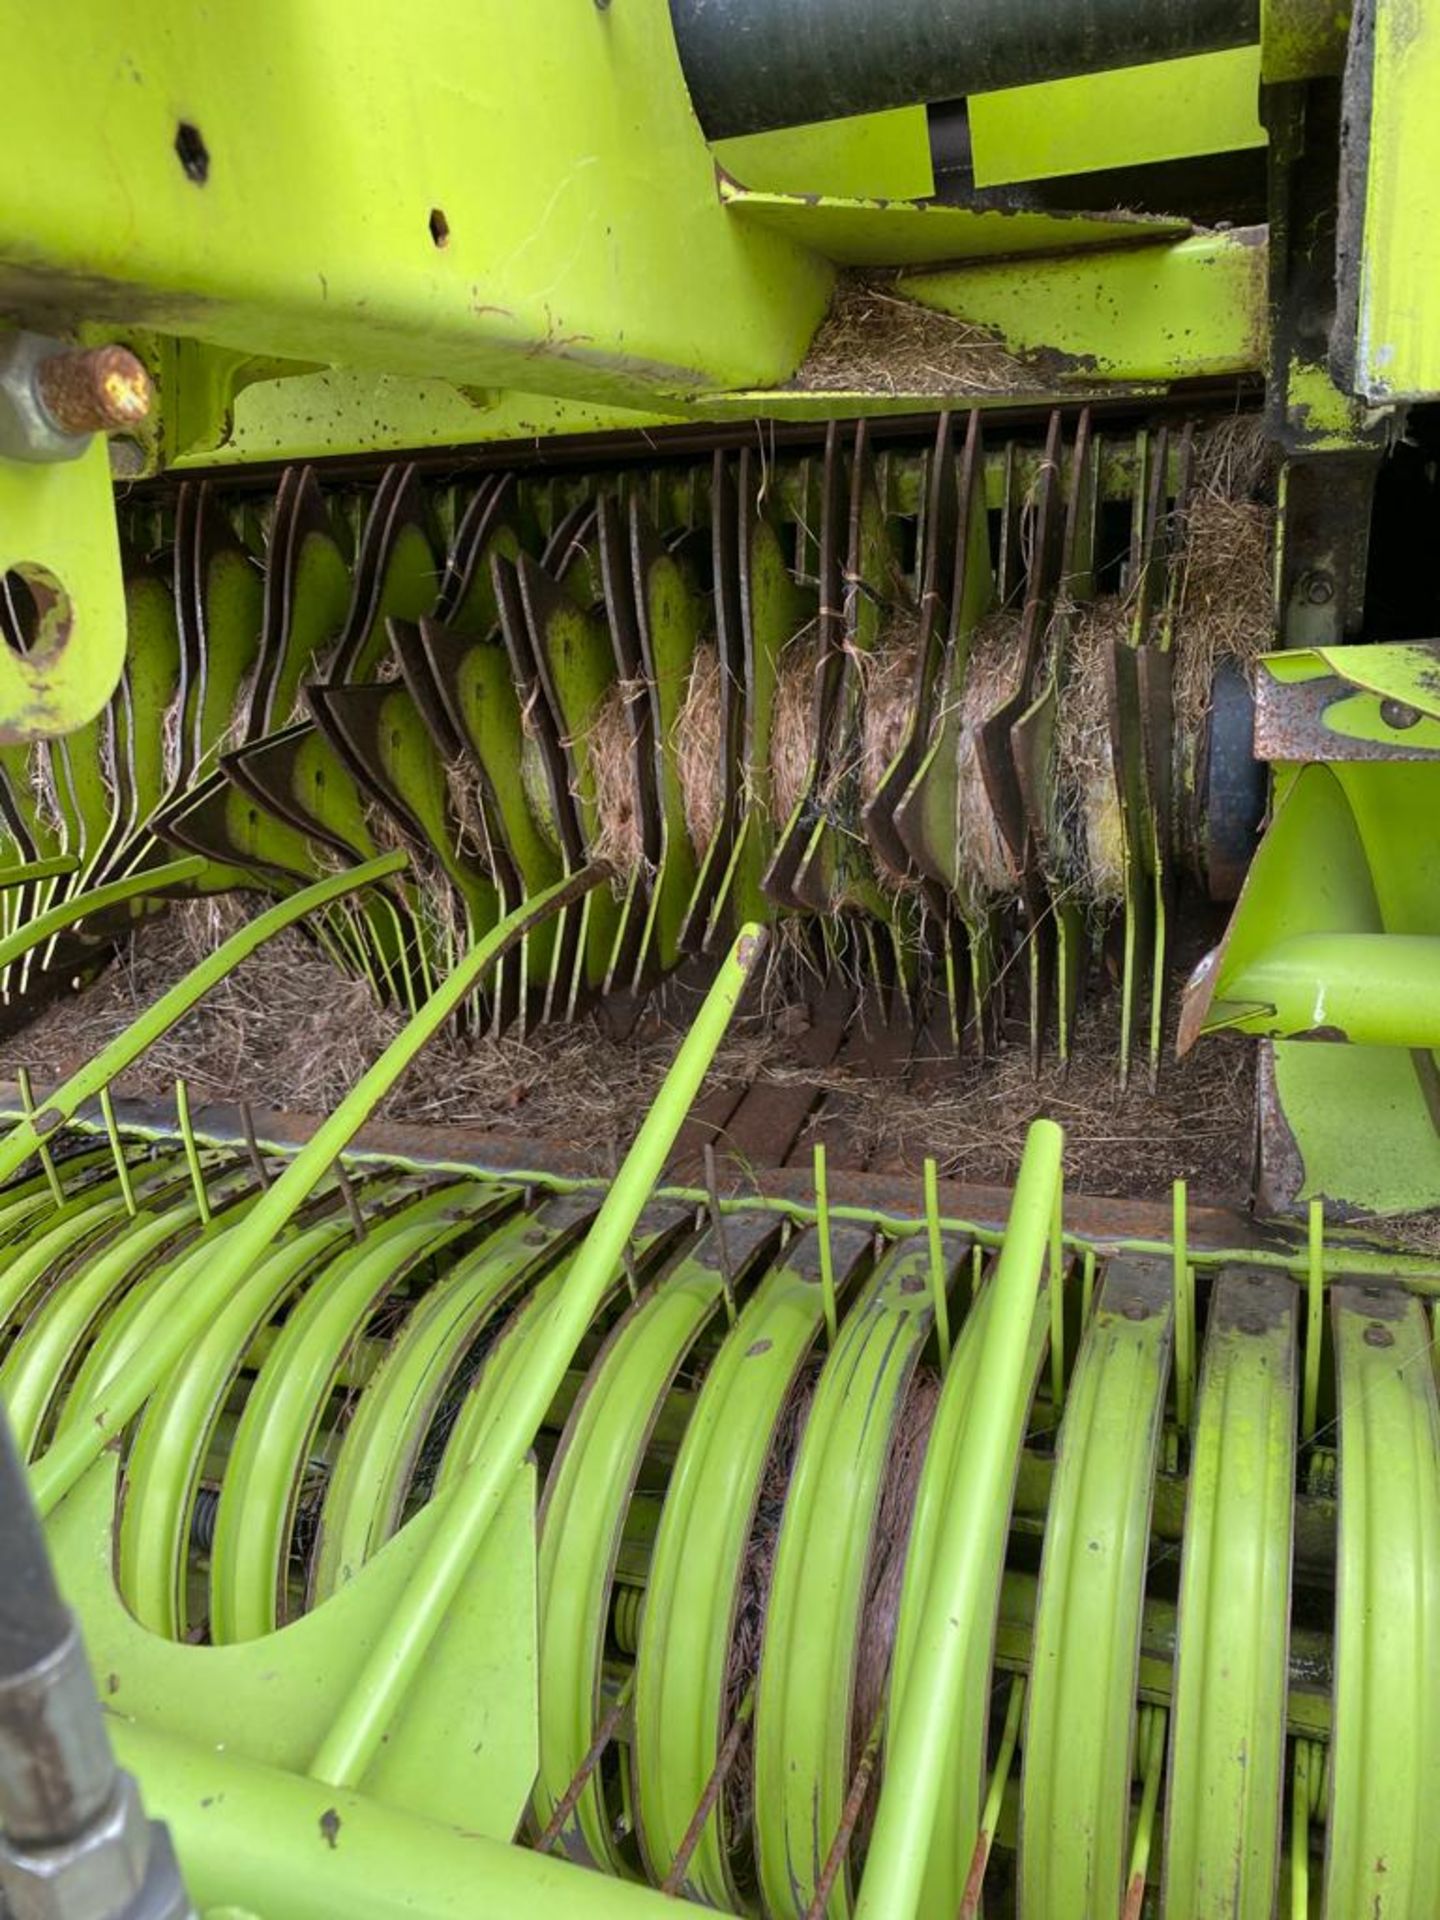 CLAAS ROLLANT 255 ROTO CUT ROUND BALER - Image 3 of 9